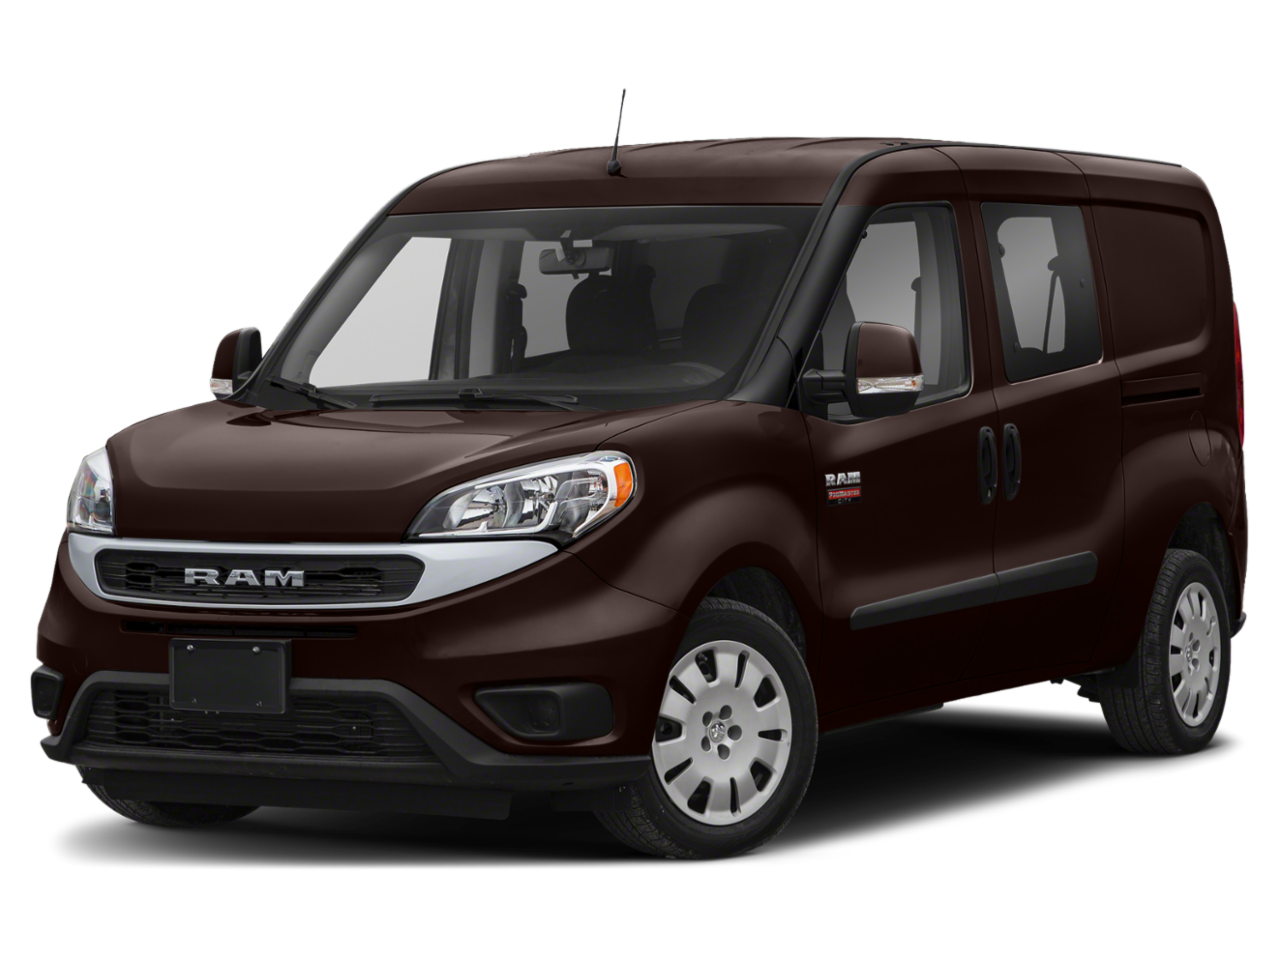 2020 Ram ProMaster City Repair: Service and Maintenance Cost